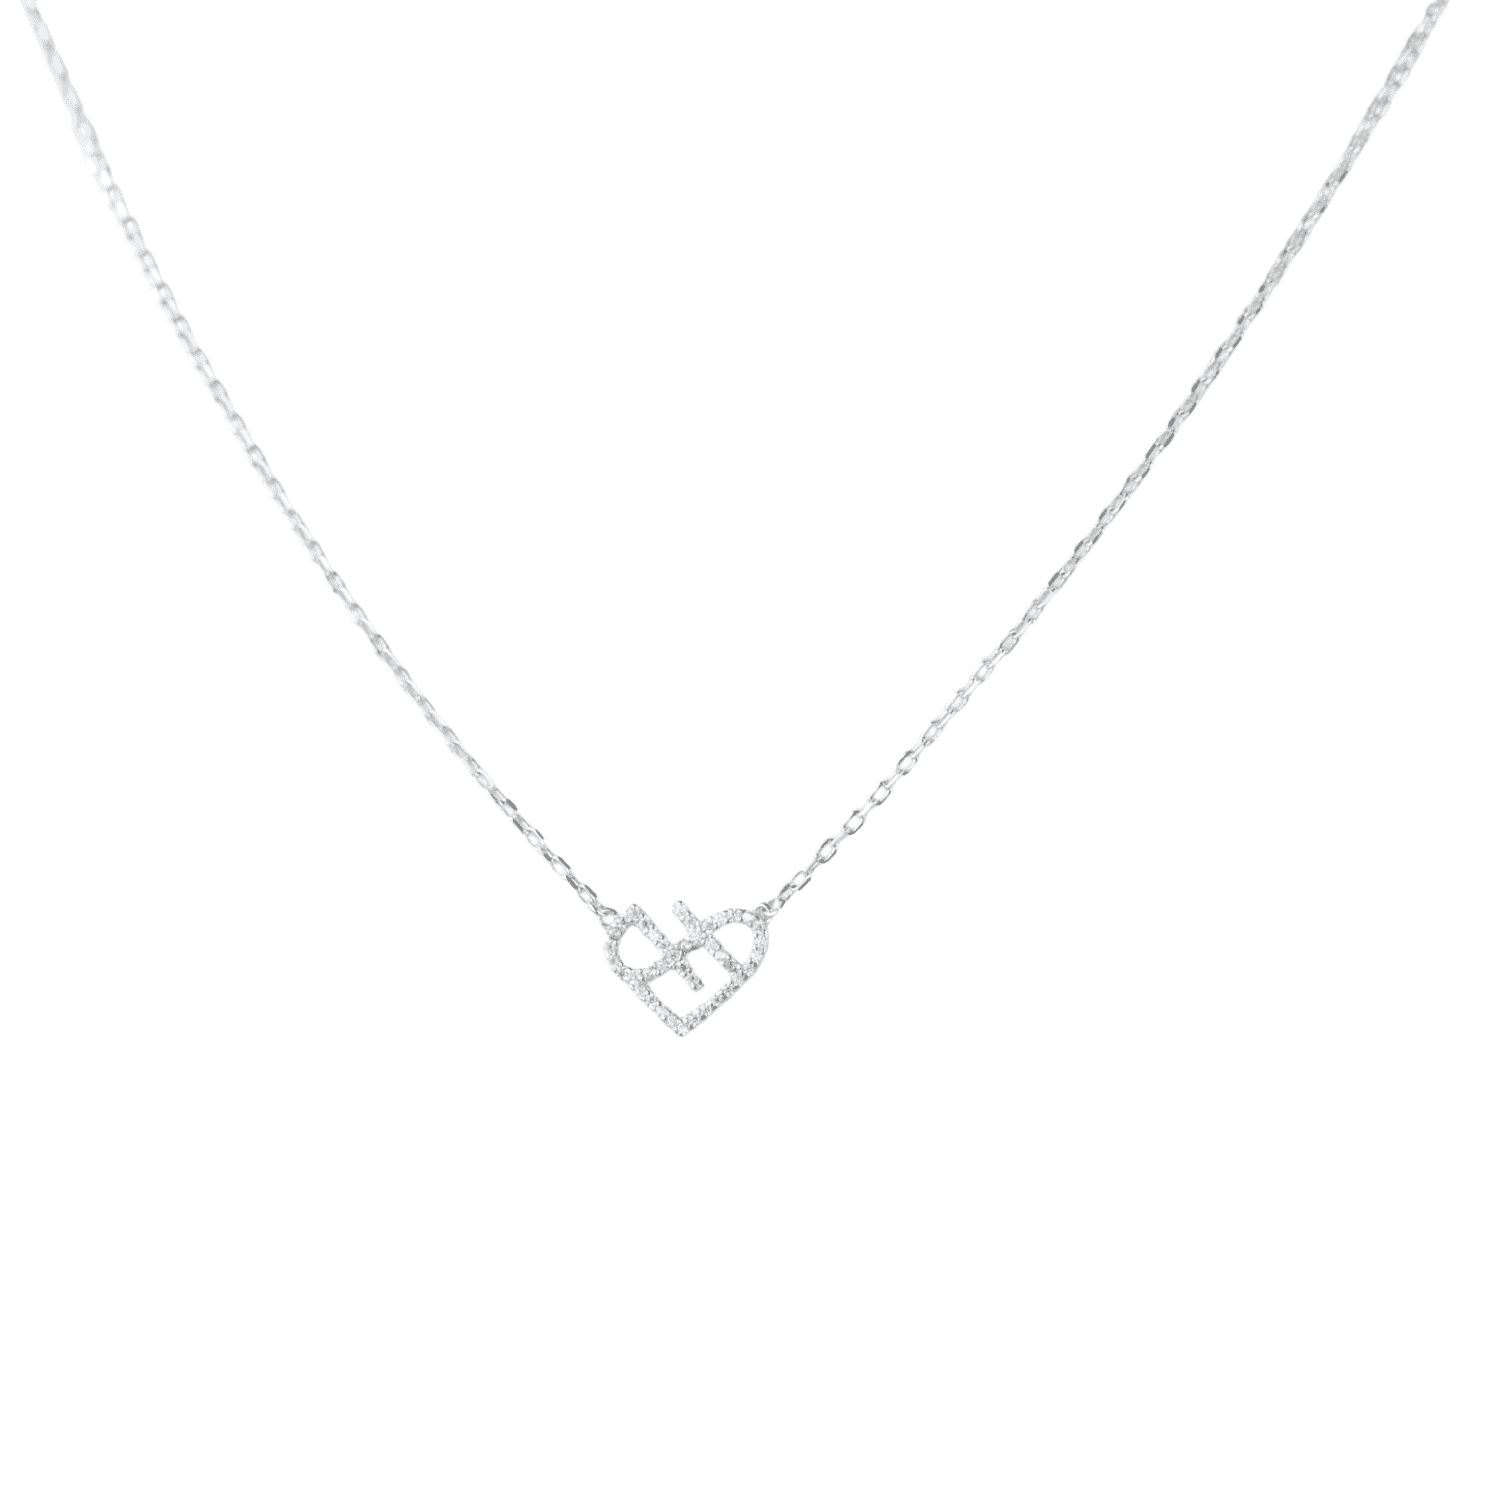 Asfour Zircon Rounded Shape 925 Sterling Silver Necklace,Clear